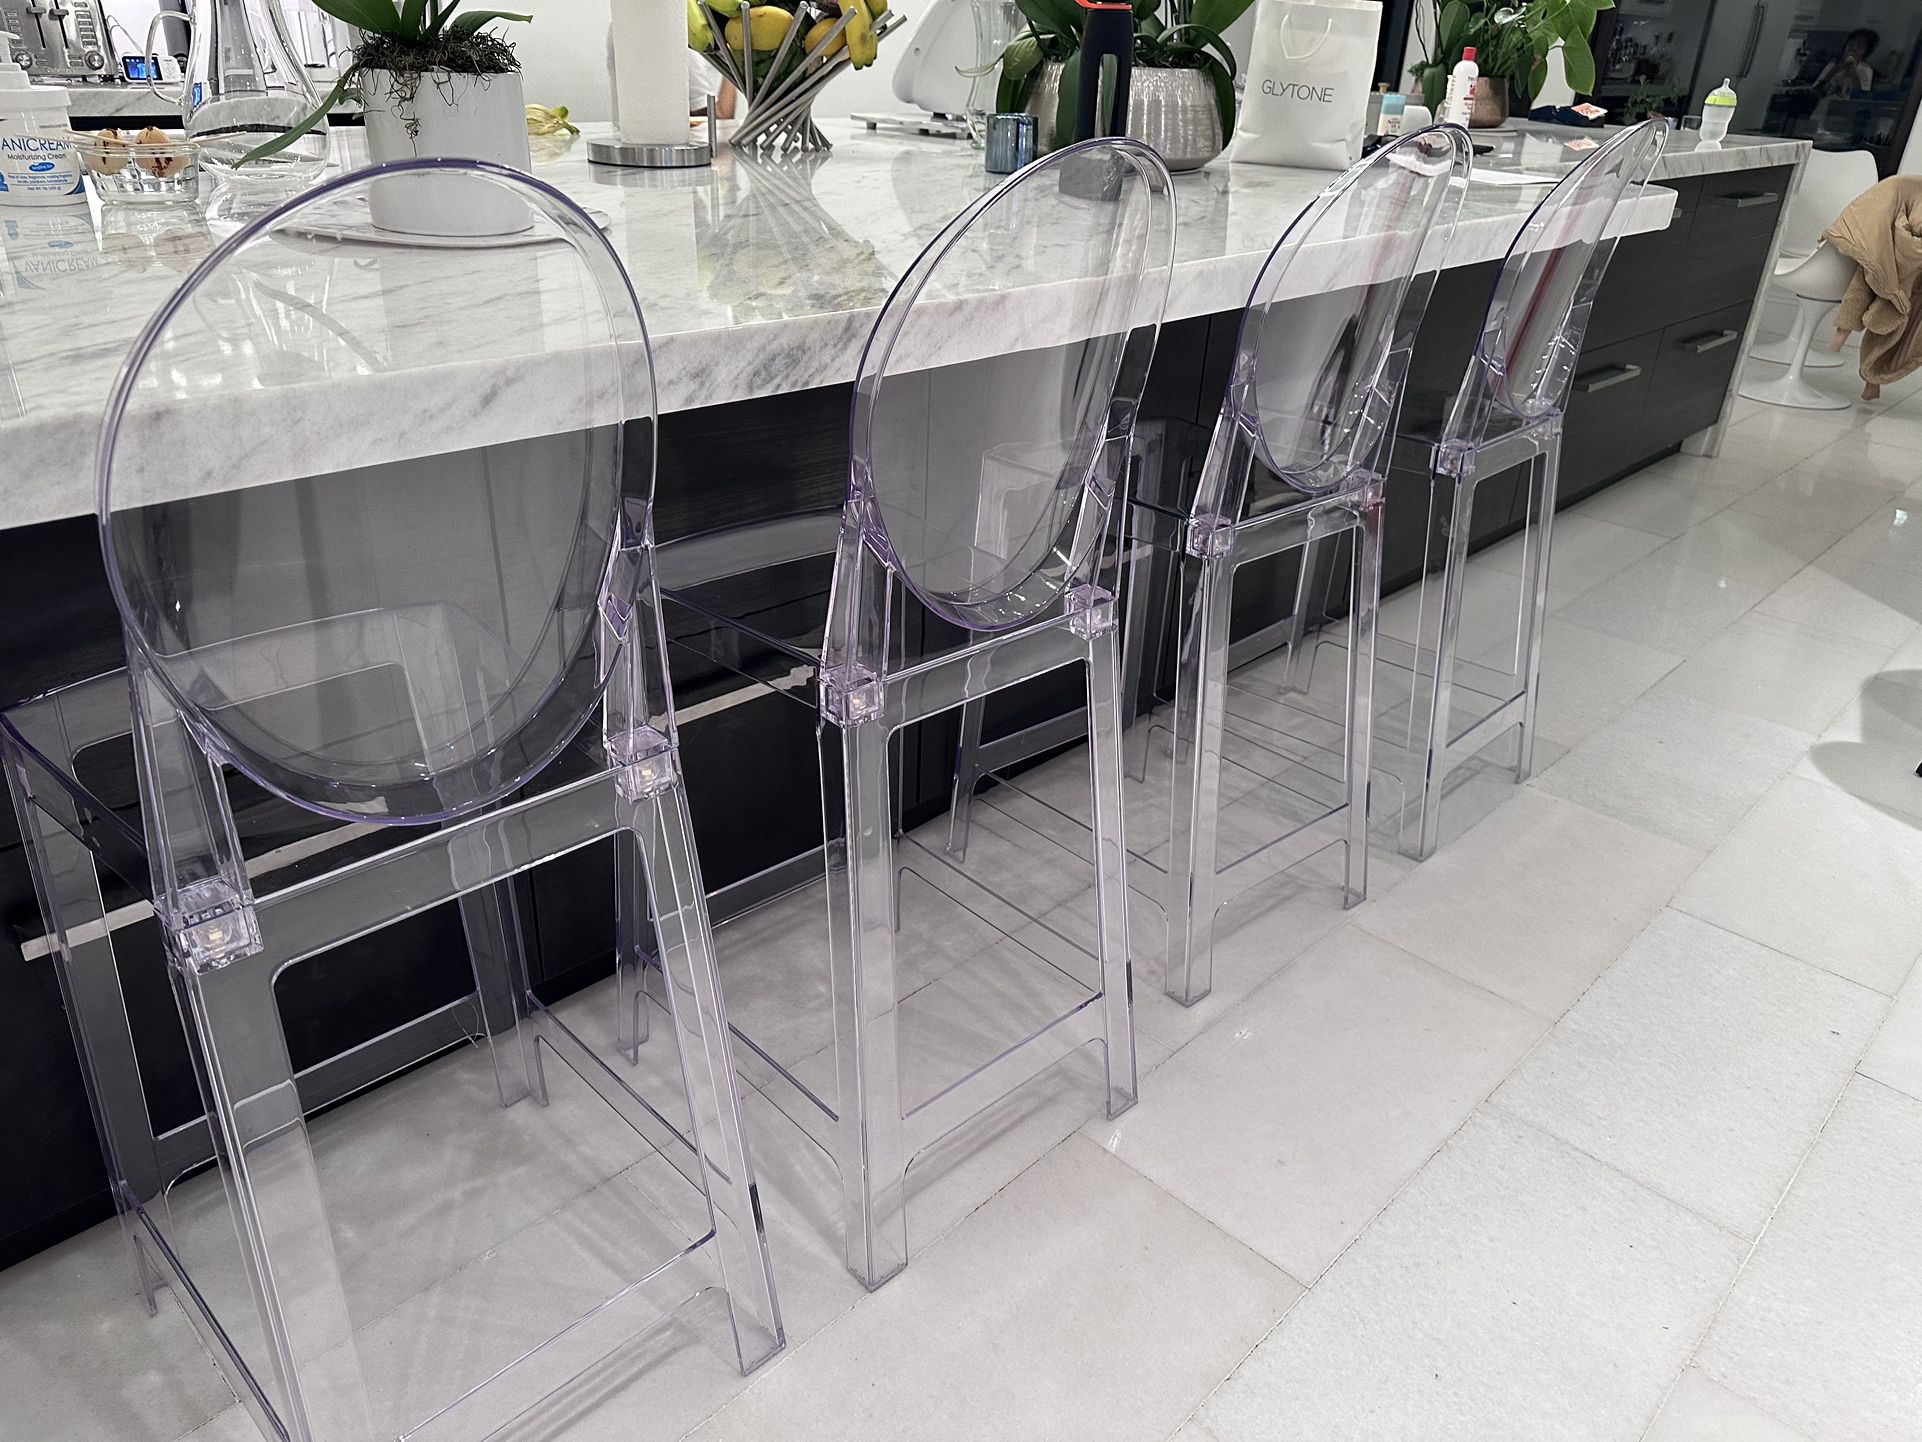 SET OF 4 BRAND NEW OUT OF BOX CLEAR GHOST  ACRYLIC COUNTER STOOLS CHAIRS